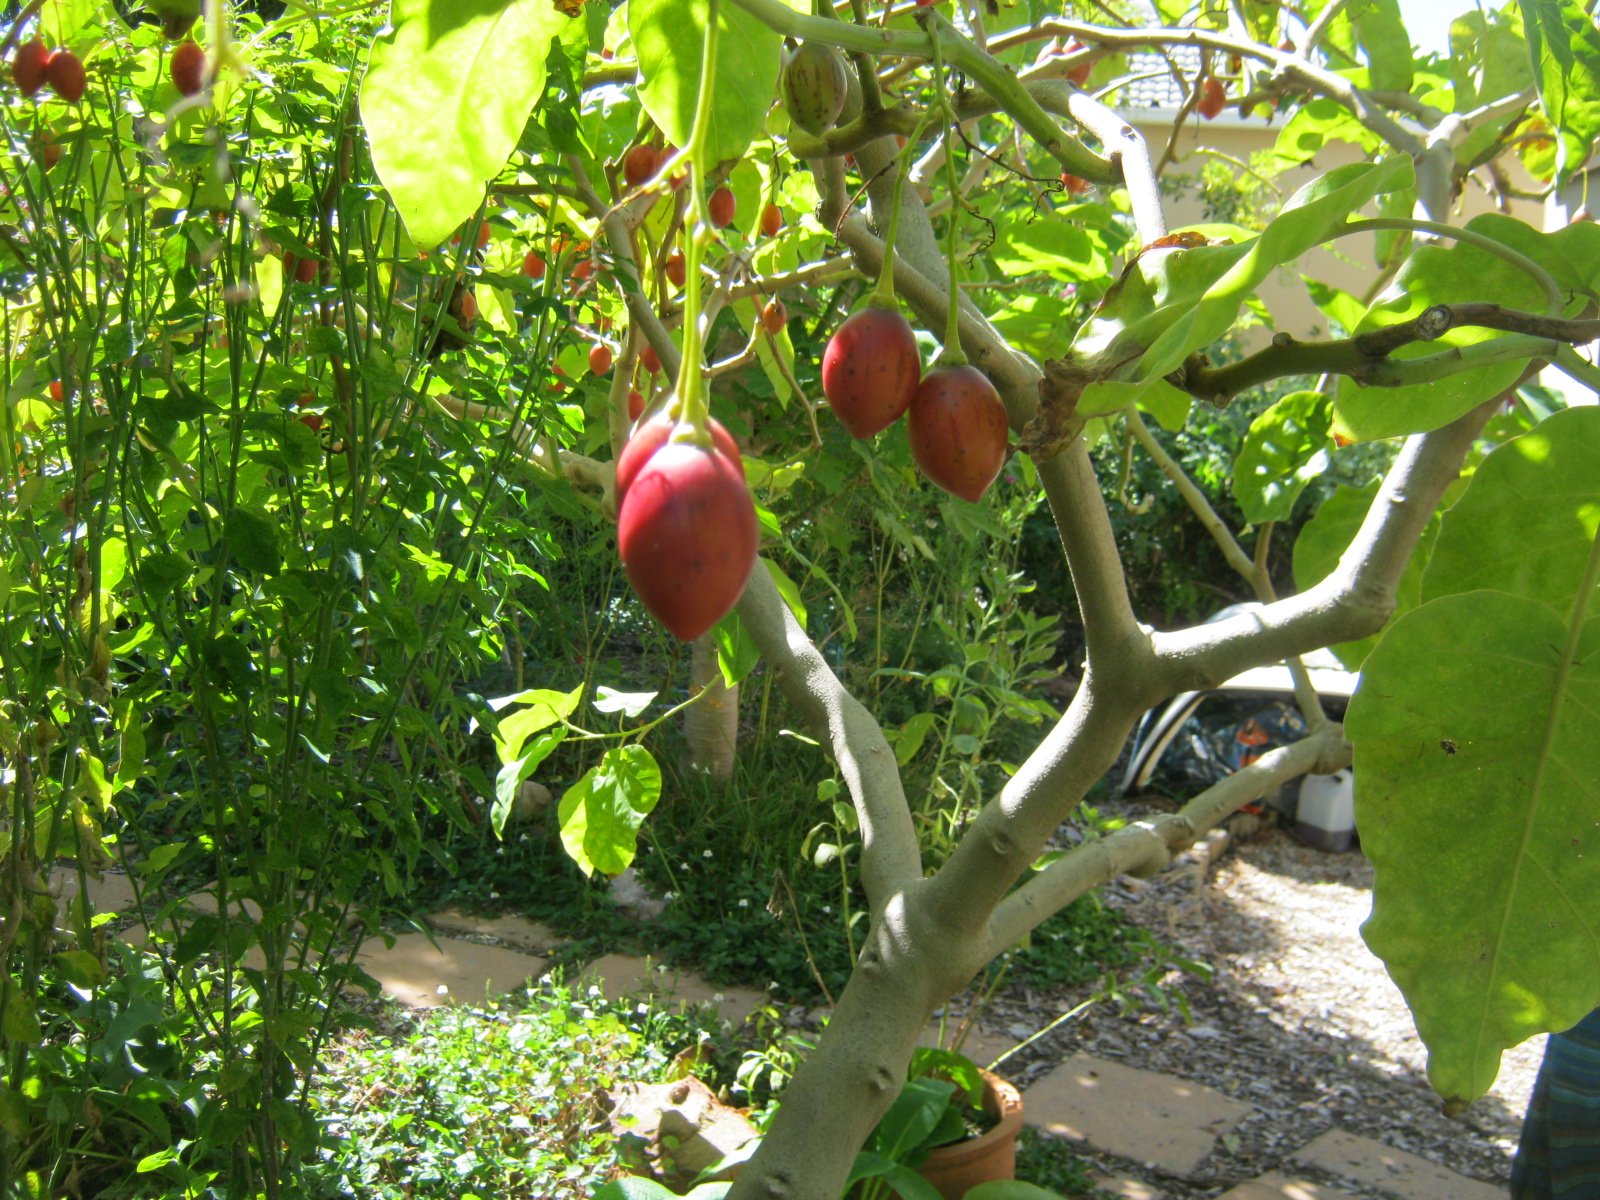 The mother plant of my tamarillos, in the Urban Farmstead in Tokai